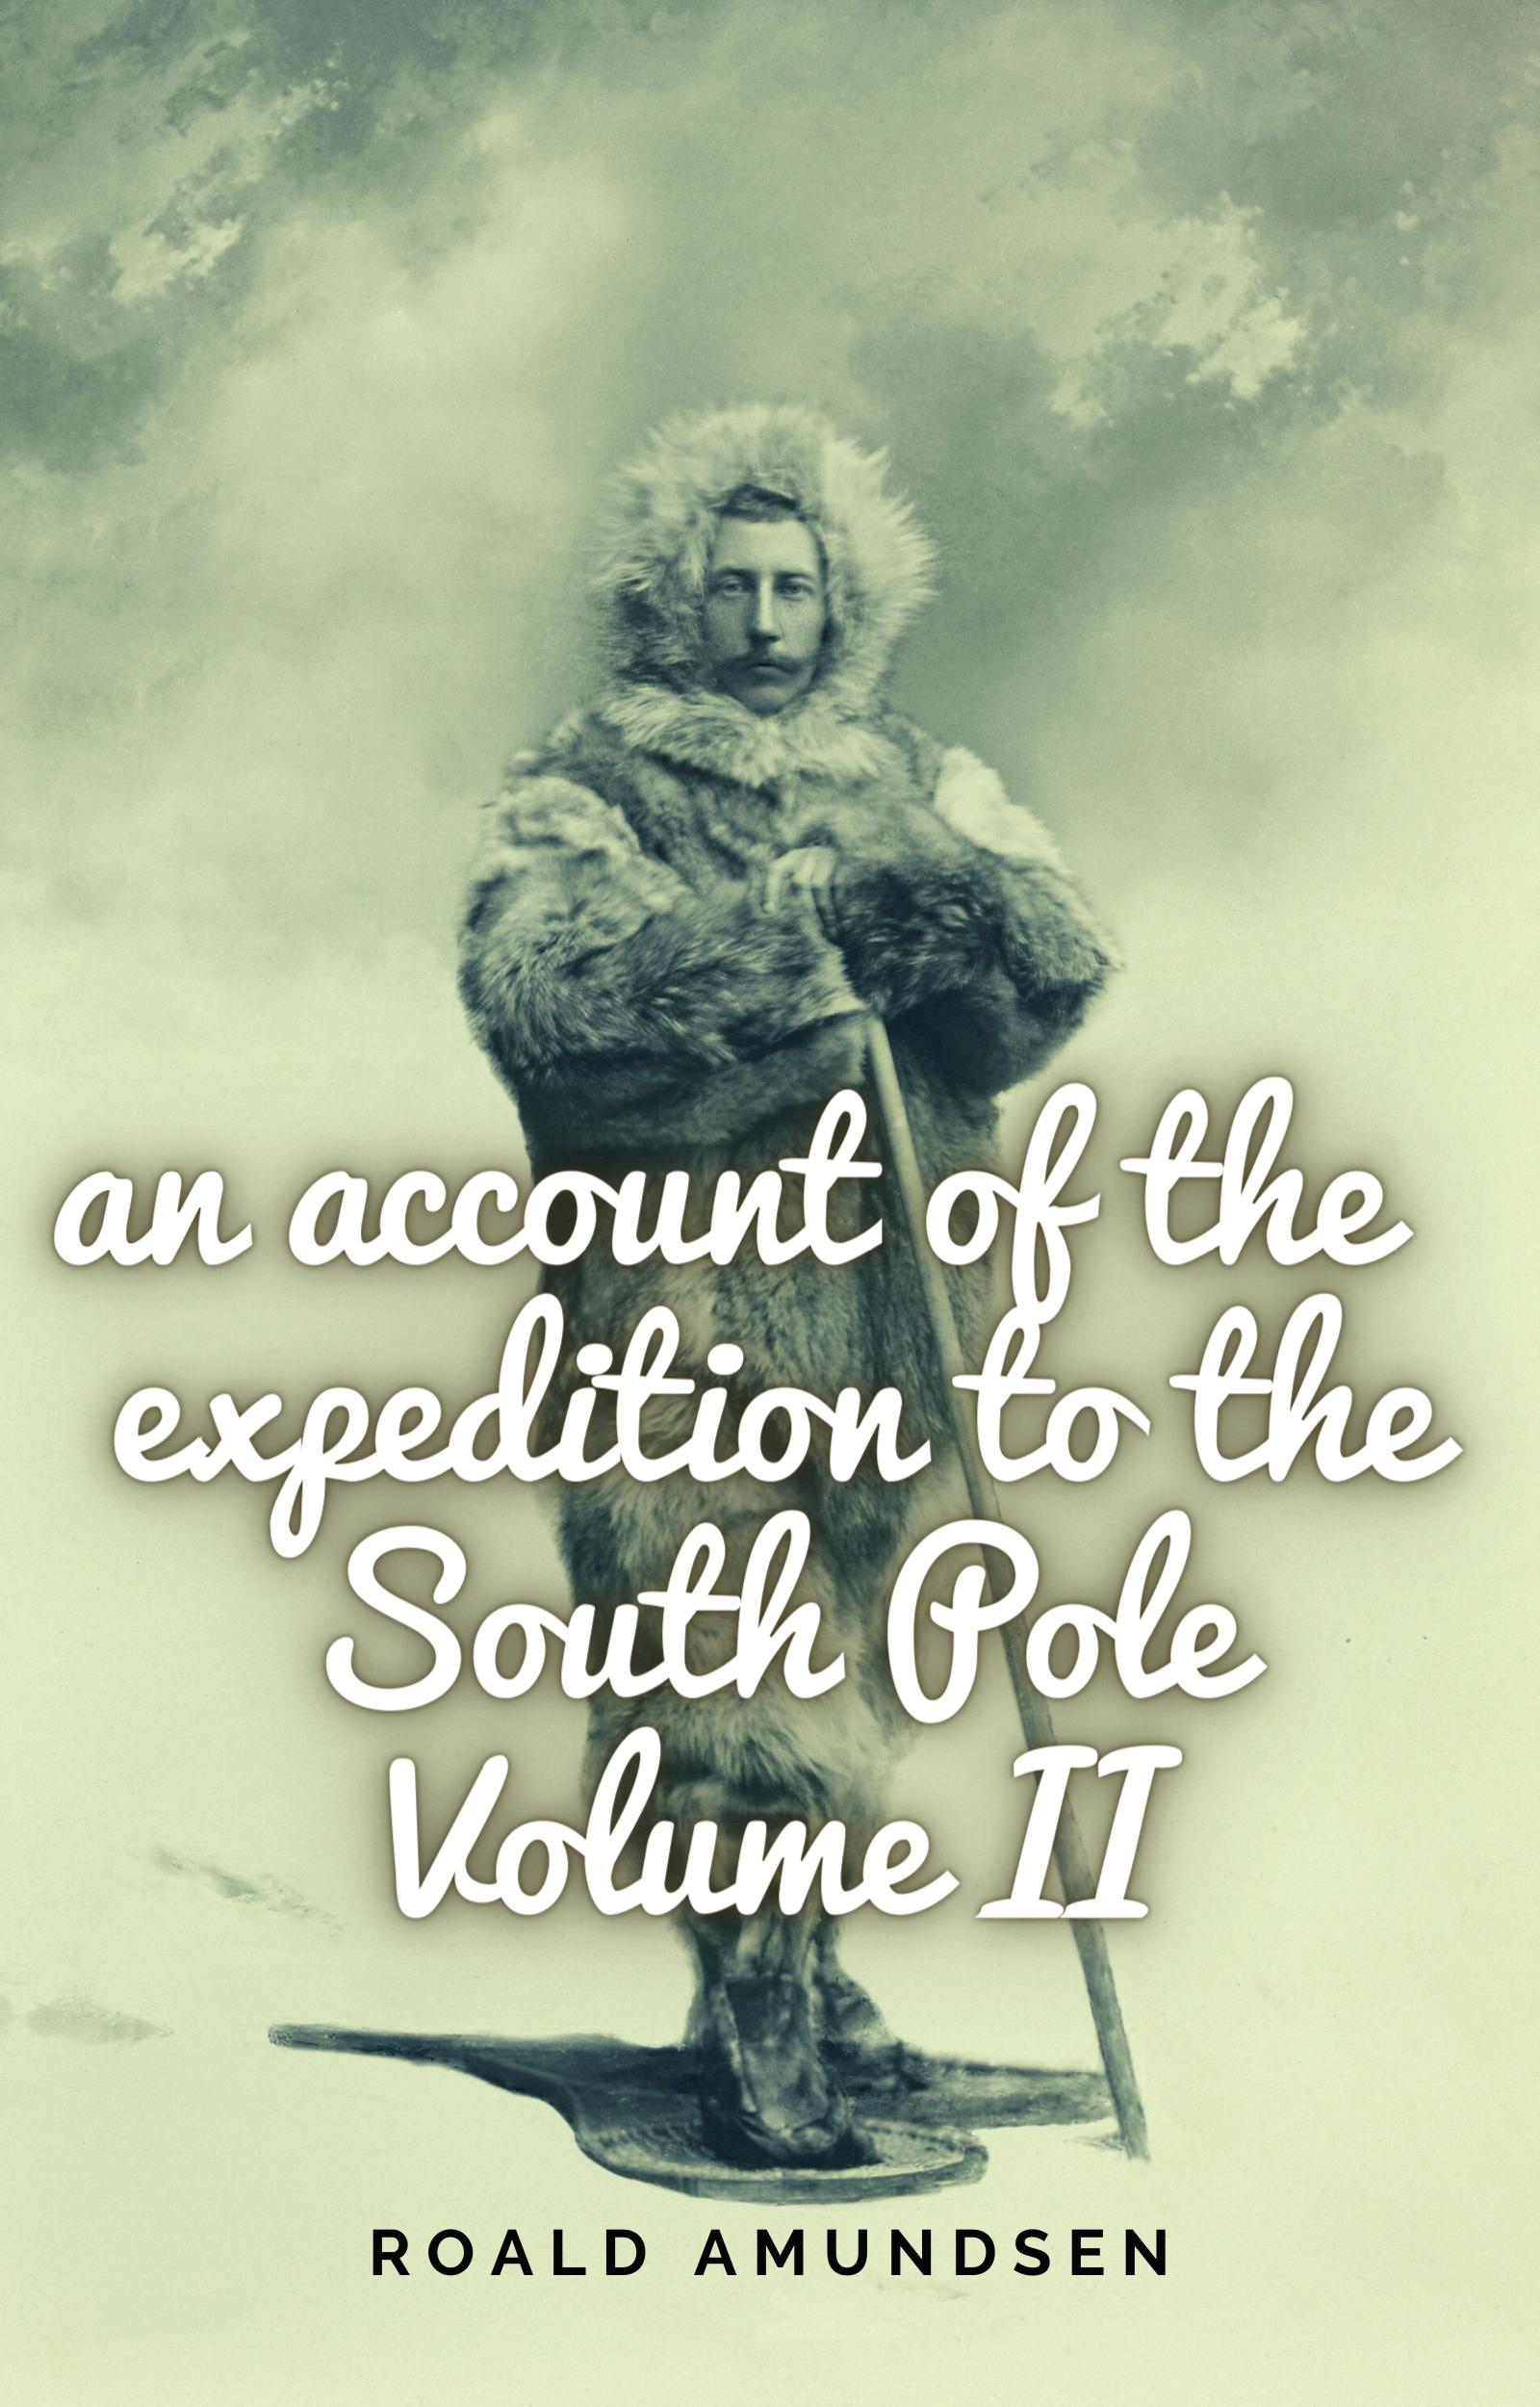  An account of the expedition to the South Pole , Volume II